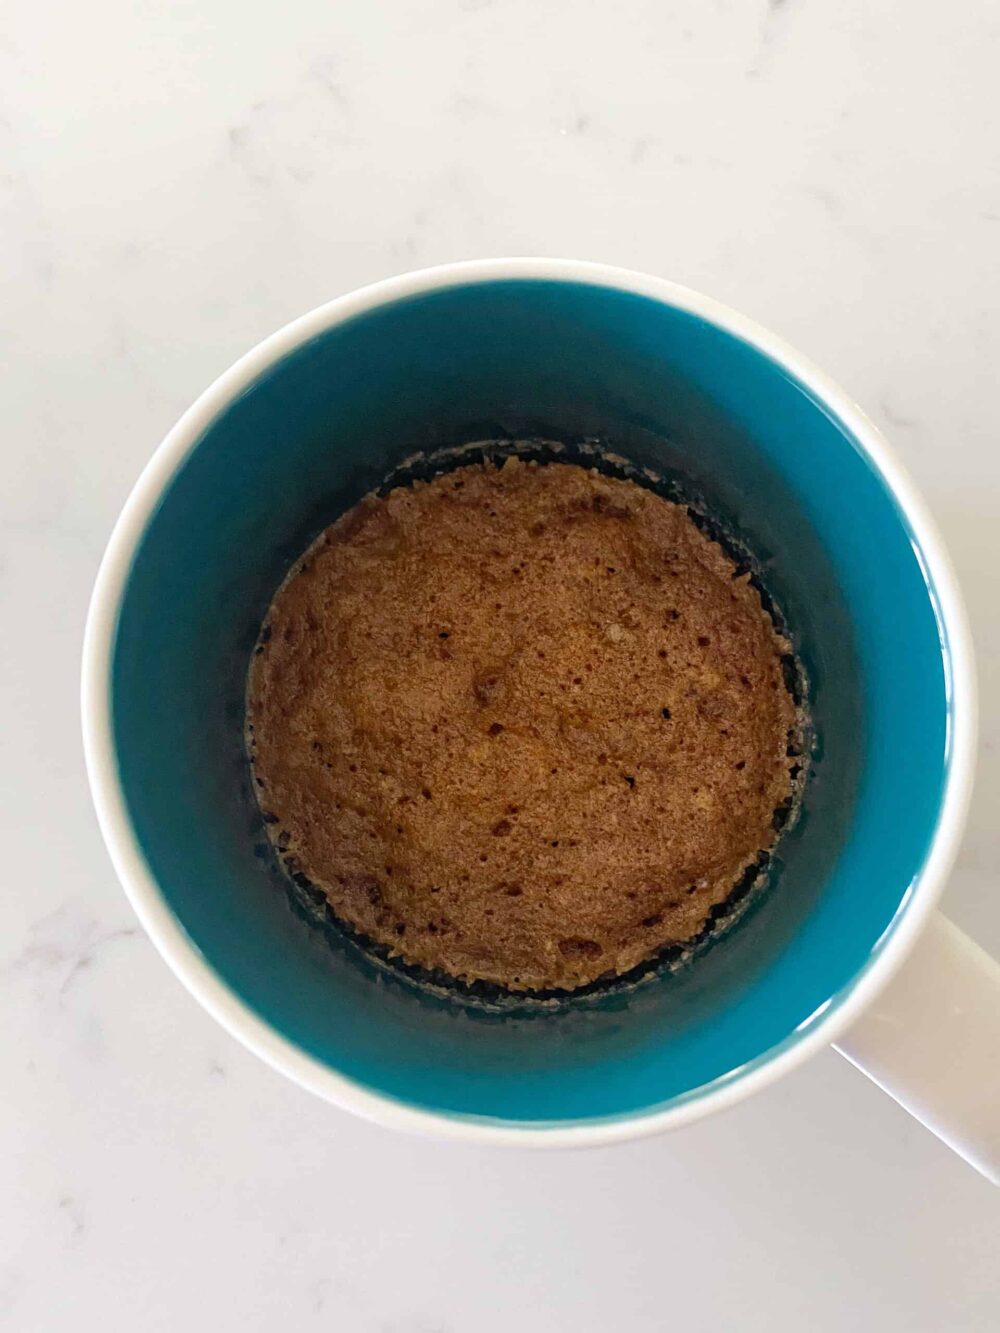 baked cookie in a mug